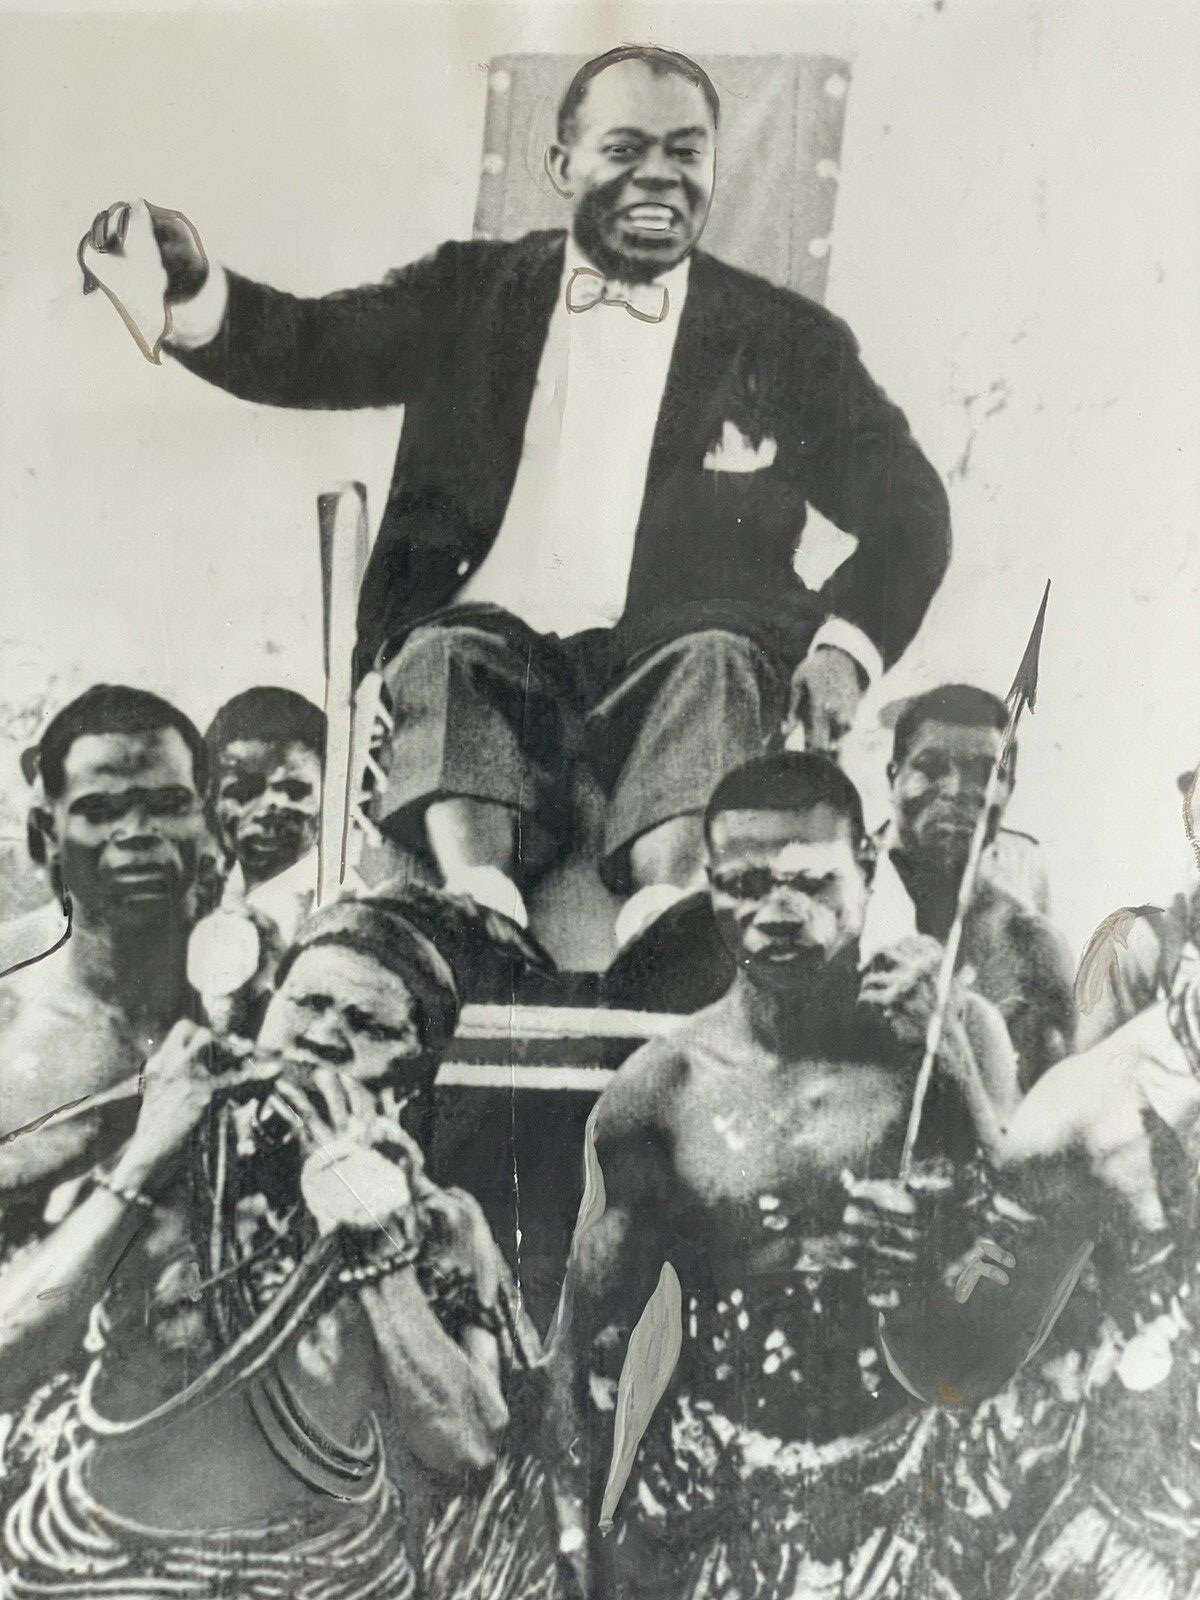 Louis Armstrong in Africa Civil Rights 1960 #historyinpieces